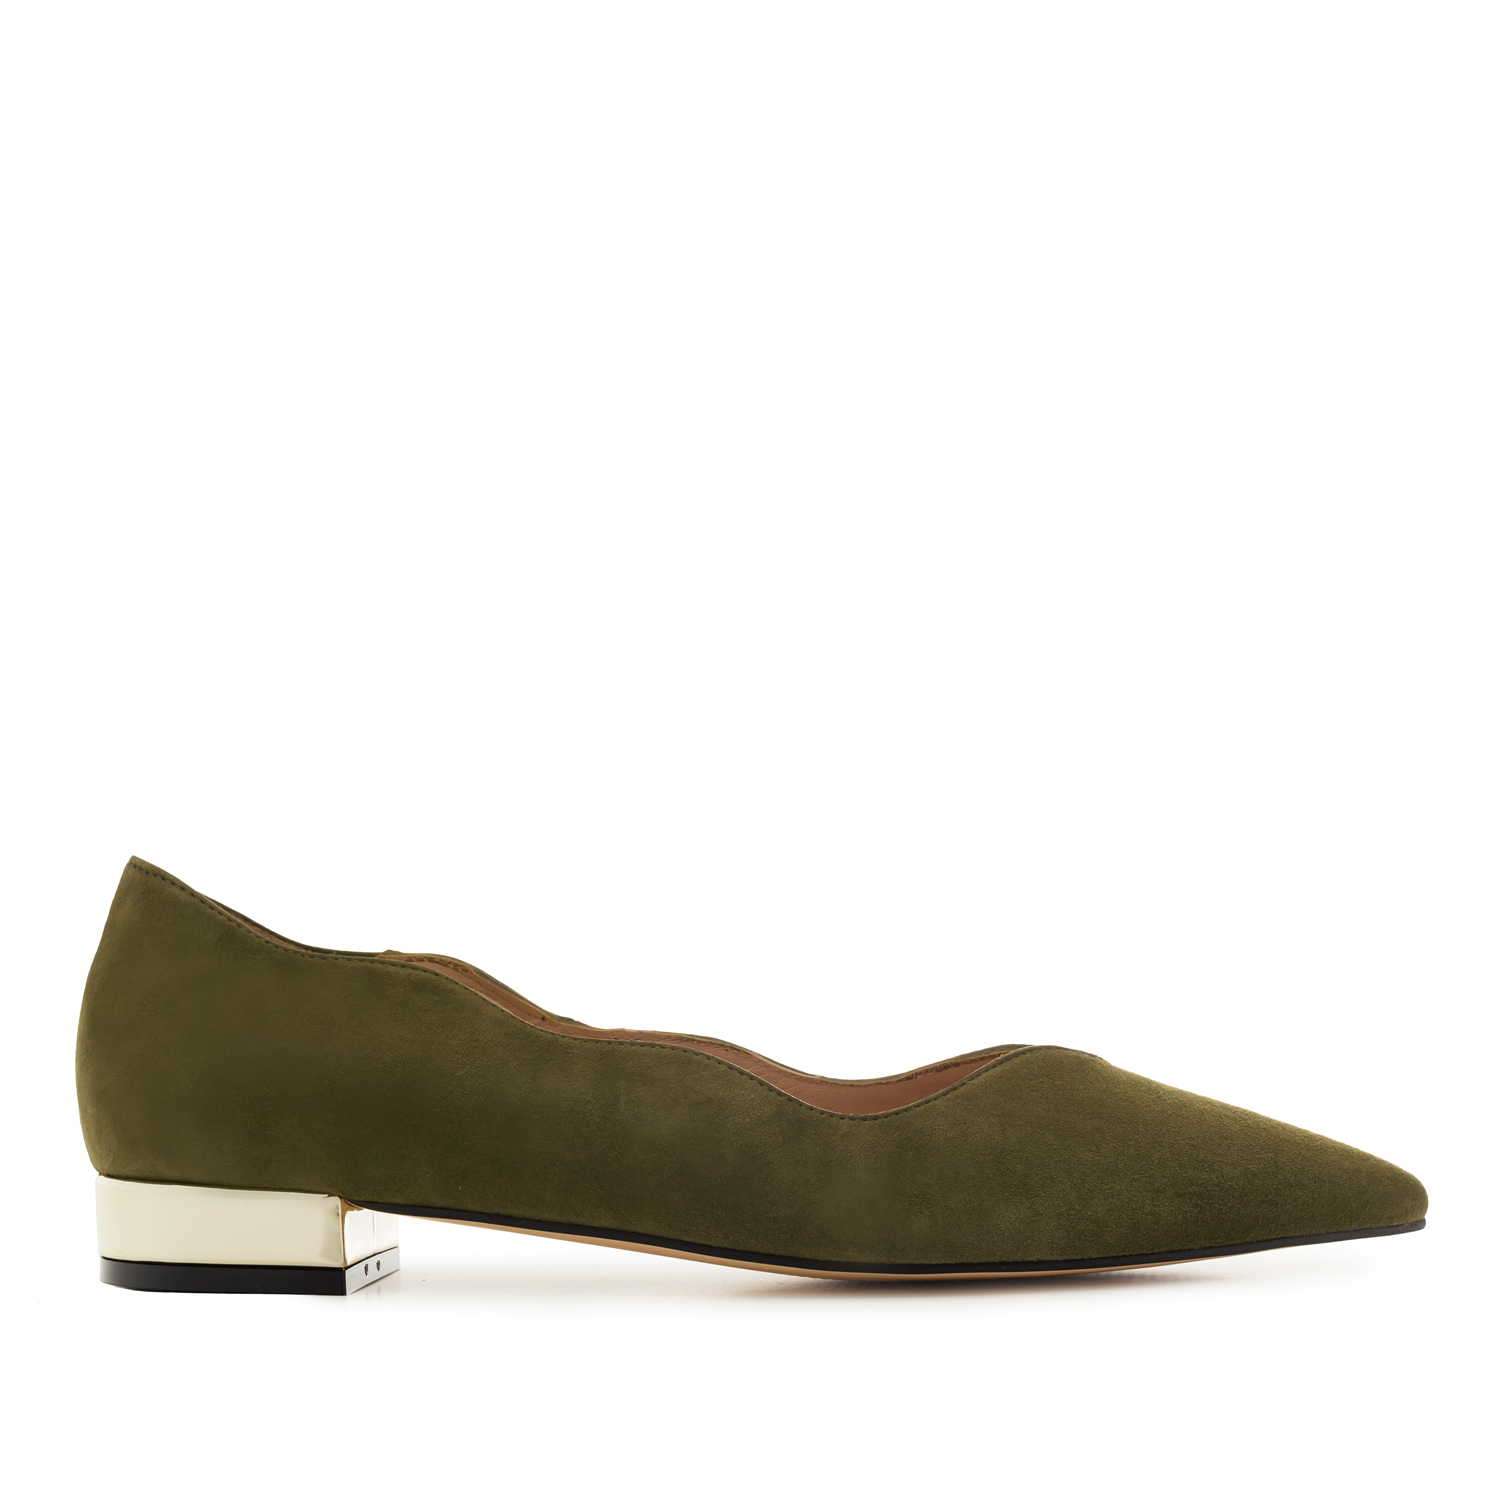 Waved Upper Ballet Flats in Olive Green Nappa Leather 